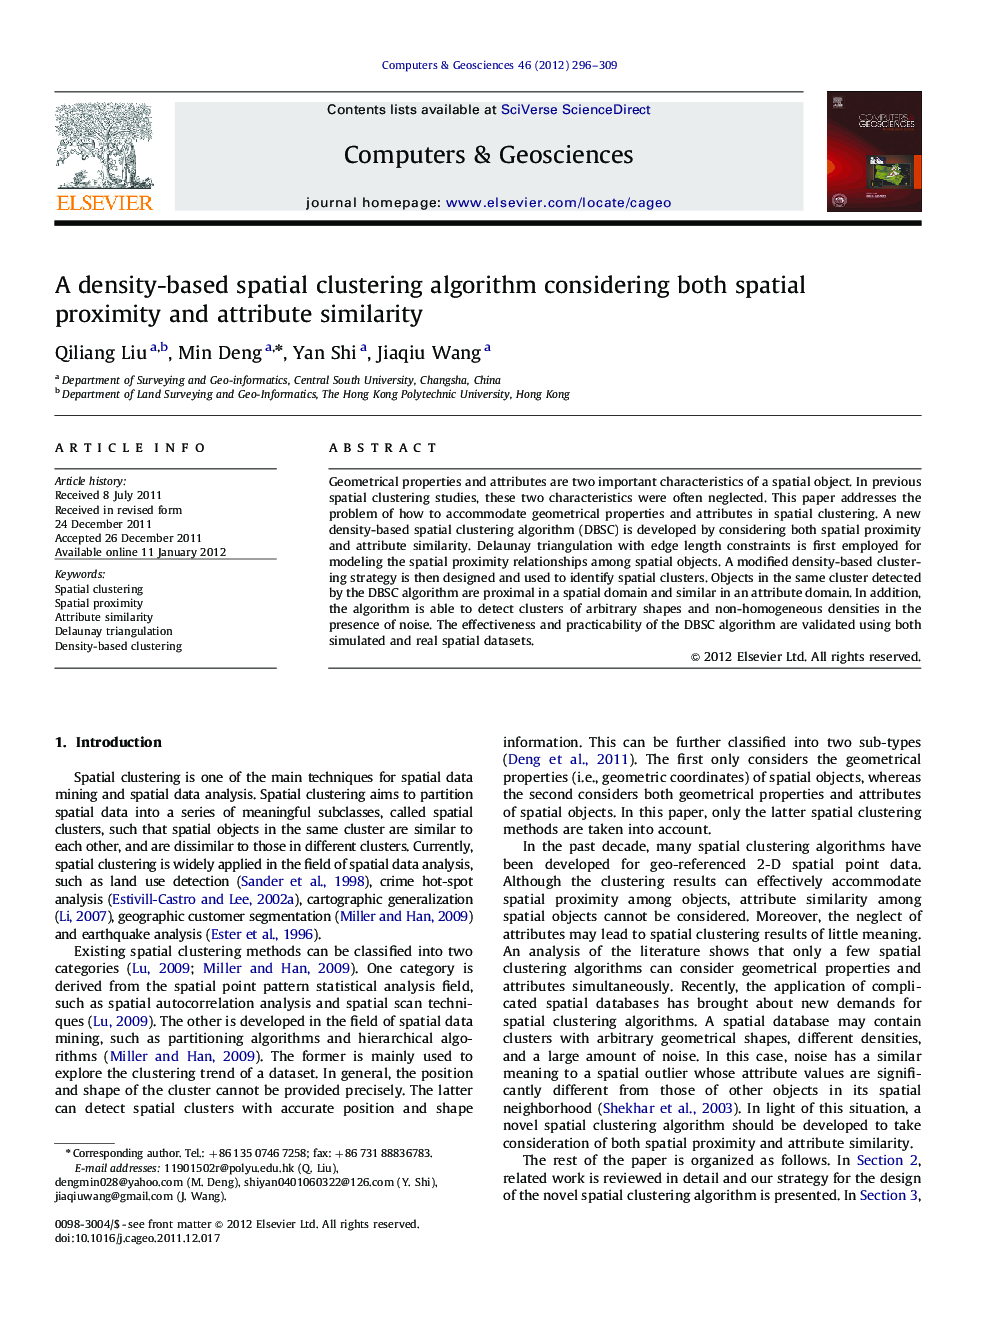 A density-based spatial clustering algorithm considering both spatial proximity and attribute similarity